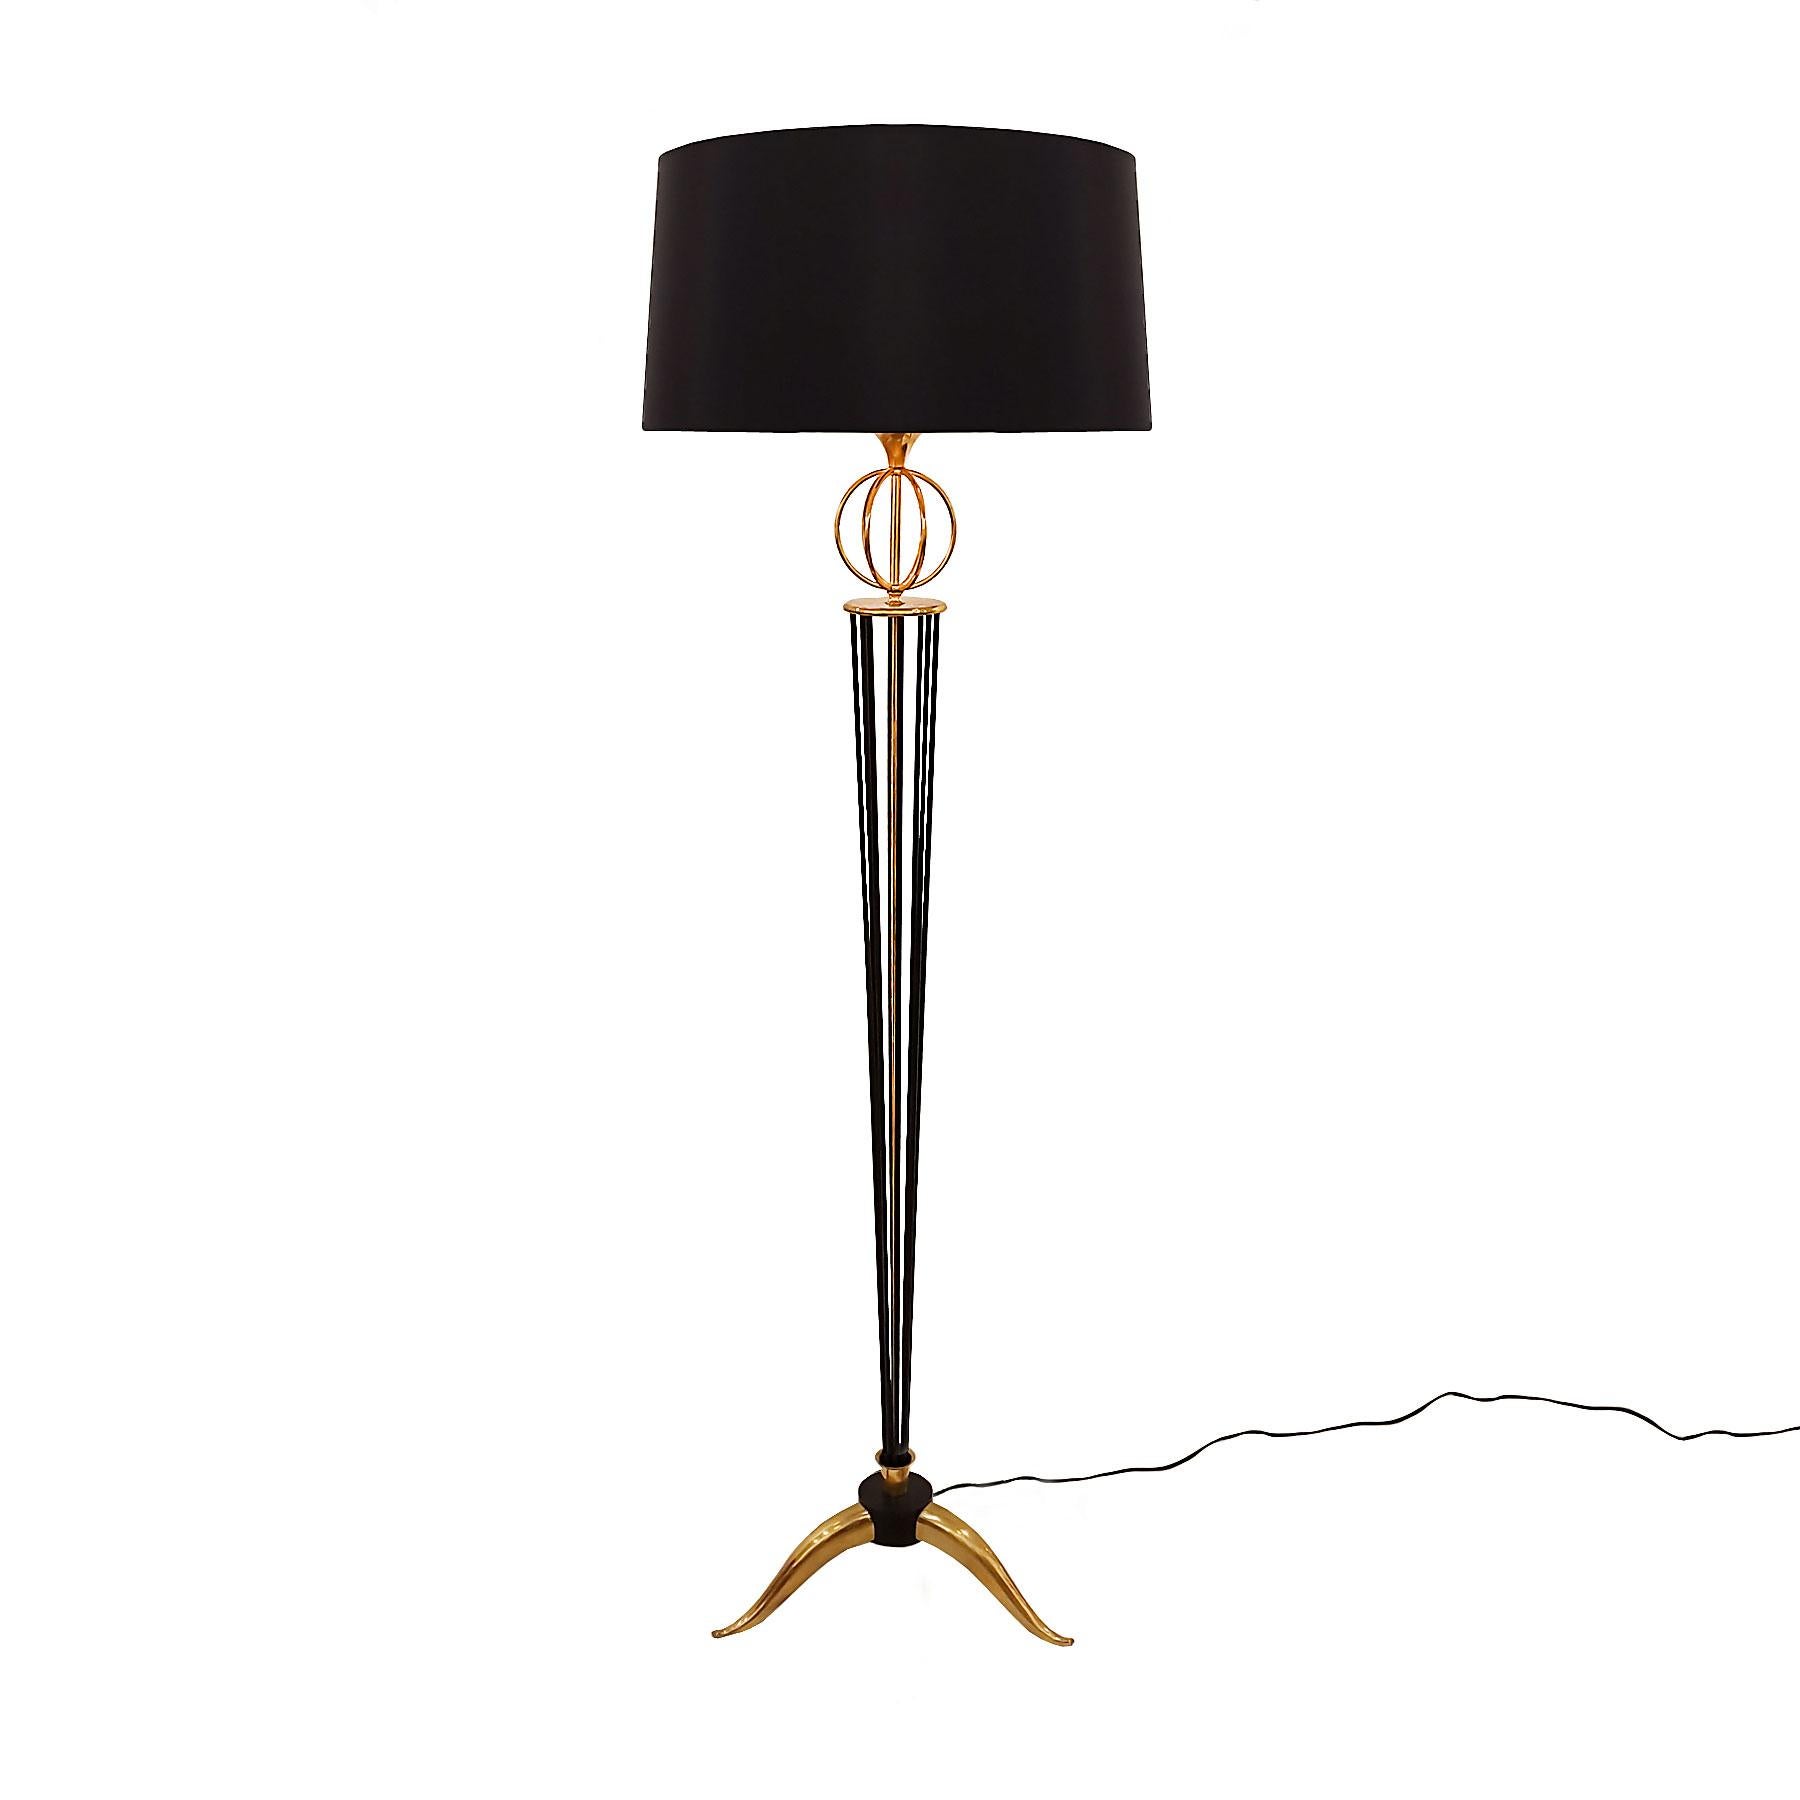 Standing lamp in black lacquered steel and polished bronze, lampshade in black silk and golden inside, made according to the original model. Bayonet bulbs.
Brand: Arlus
France, 1955.

Publication: Meubles & Décors Nº 686, October 1955.